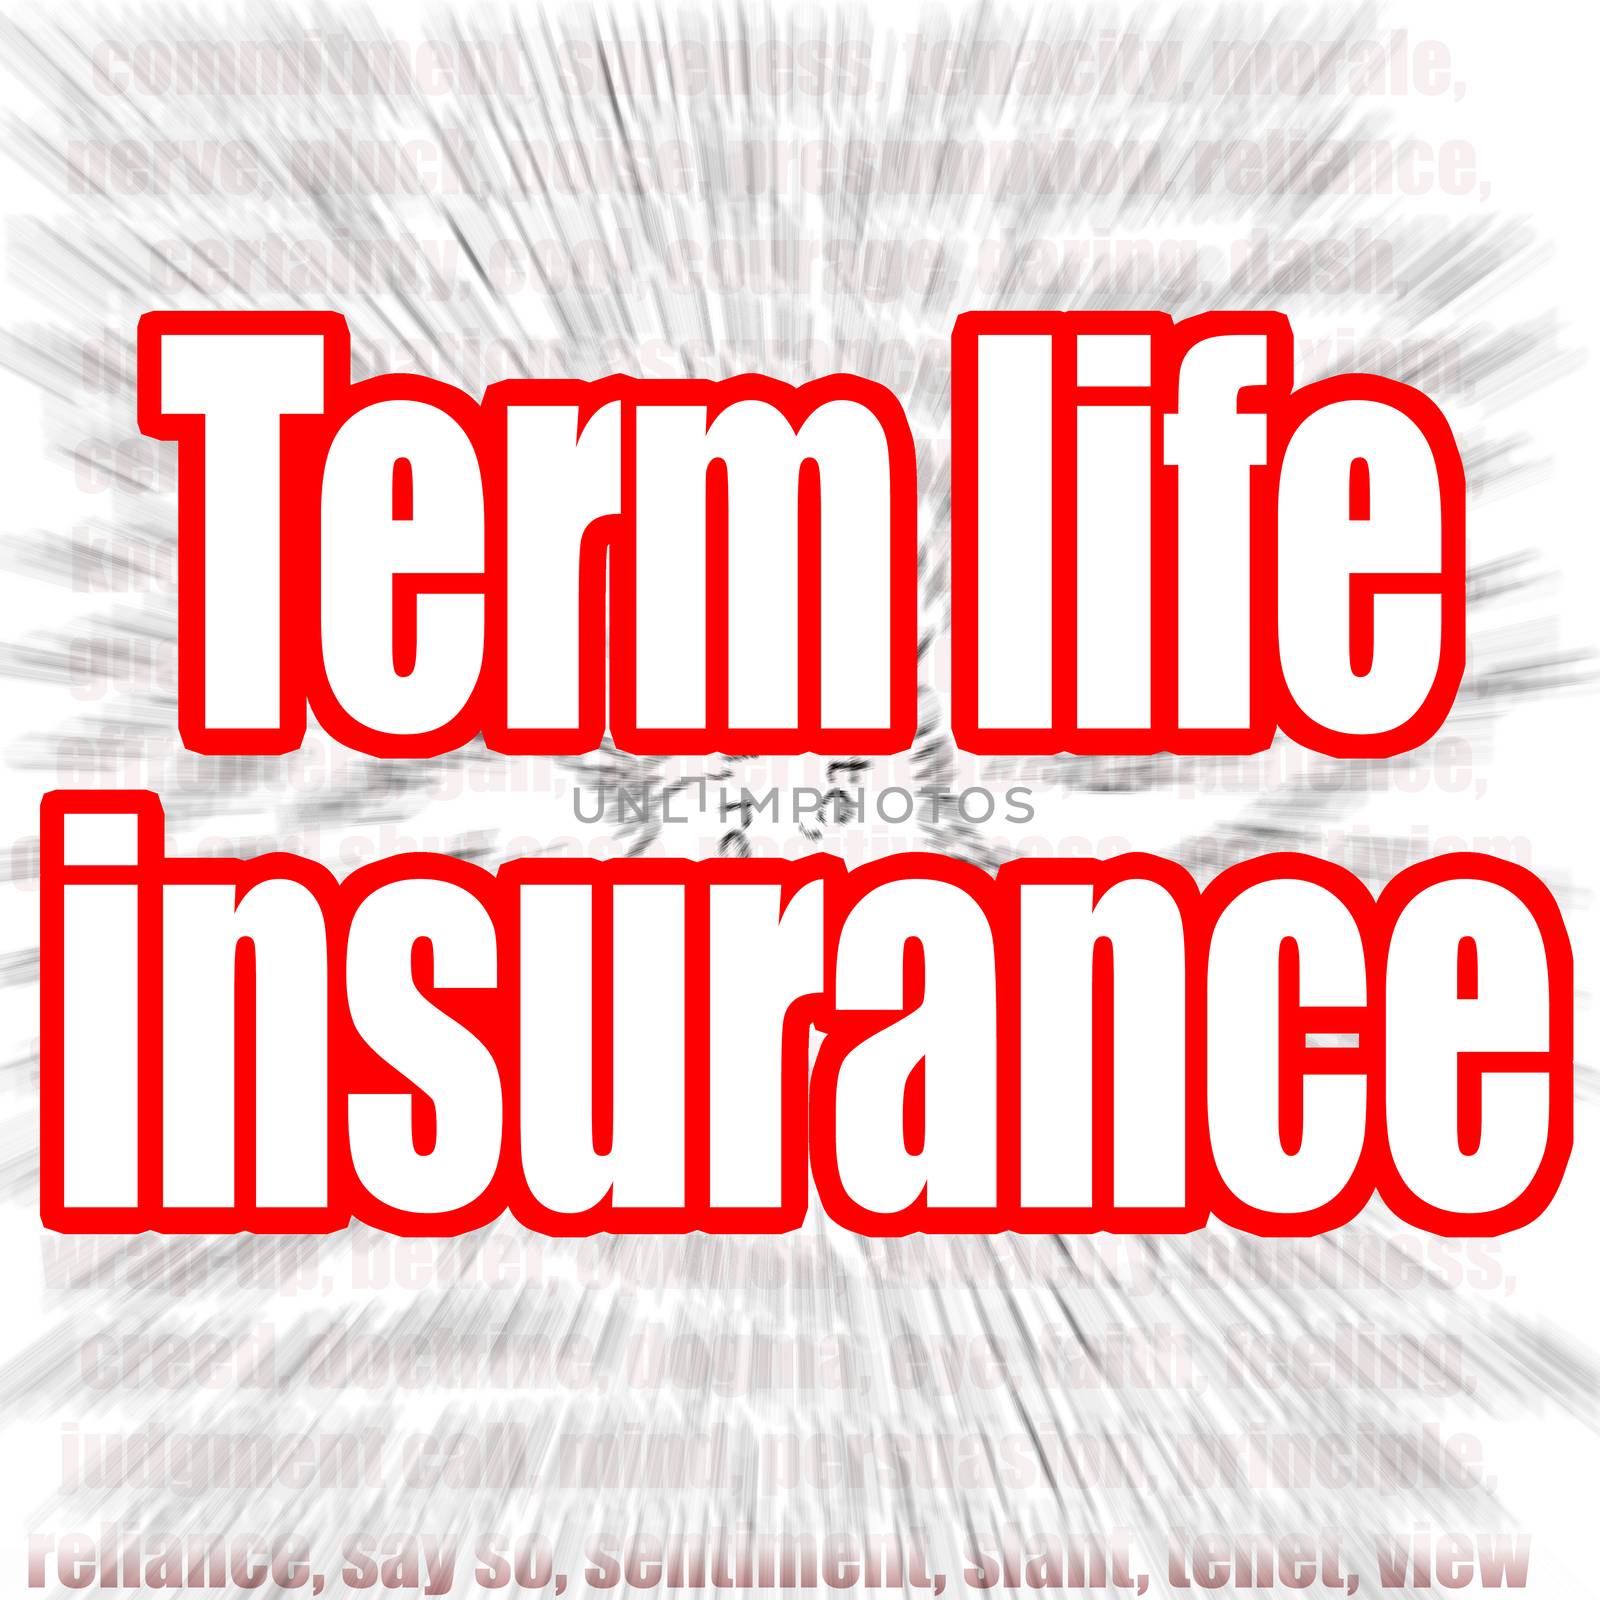 Term life insurance word with zoom in effect as background, 3D rendering